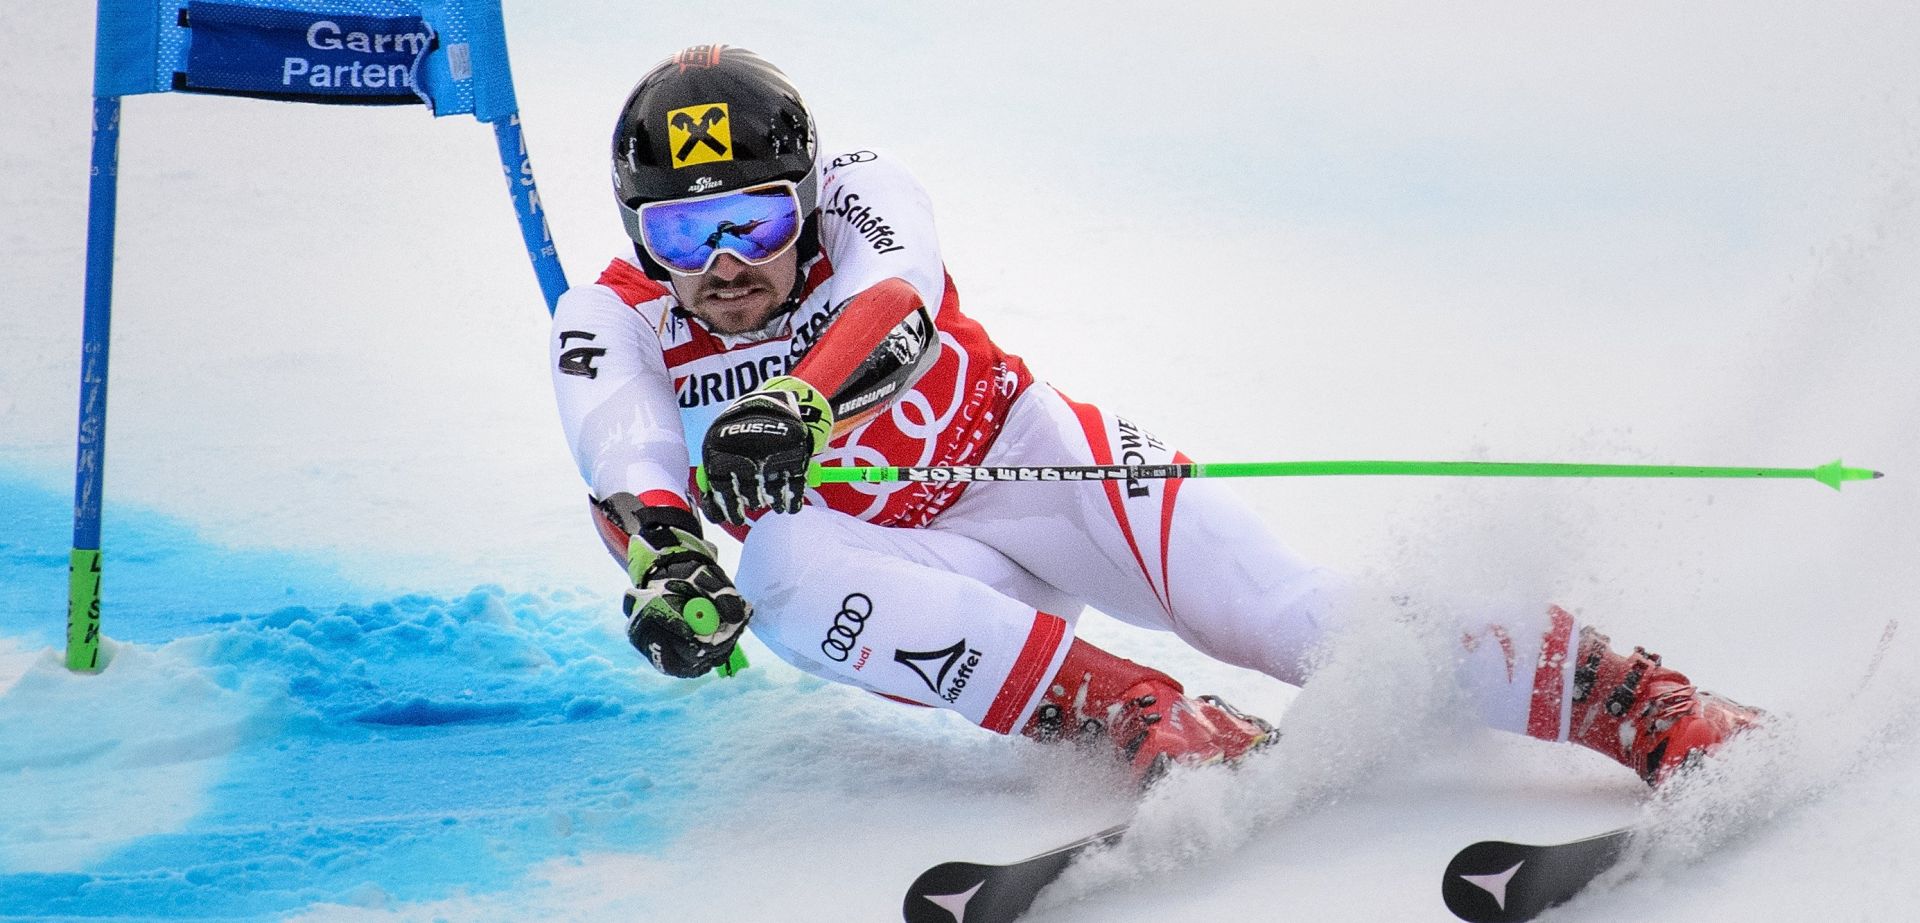 epa06480650 Marcel Hirscher of Austria speeds down the slope during the first run of the Men's Giant Slalom race of the FIS Alpine Skiing World Cup in Garmisch-Partenkirchen, Germany, 28 January 2018.  EPA/PHILIPP GUELLAND